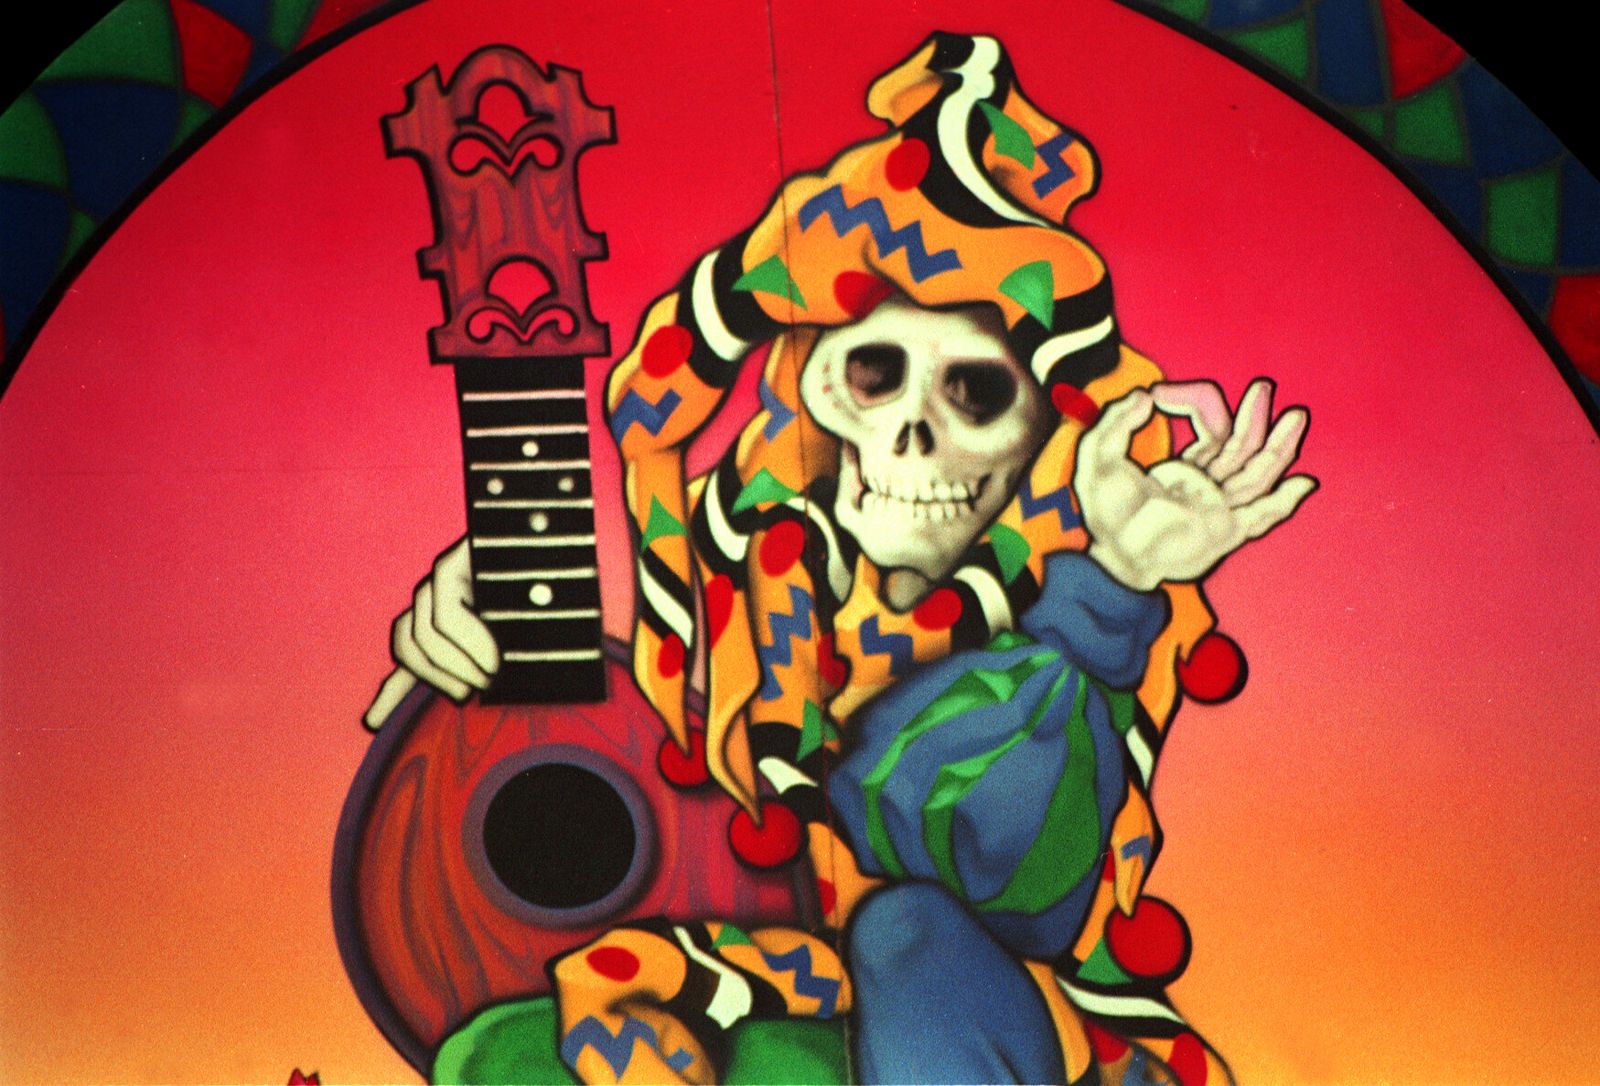 Between the Dark and the Light, The Grateful Dead 1965-1995